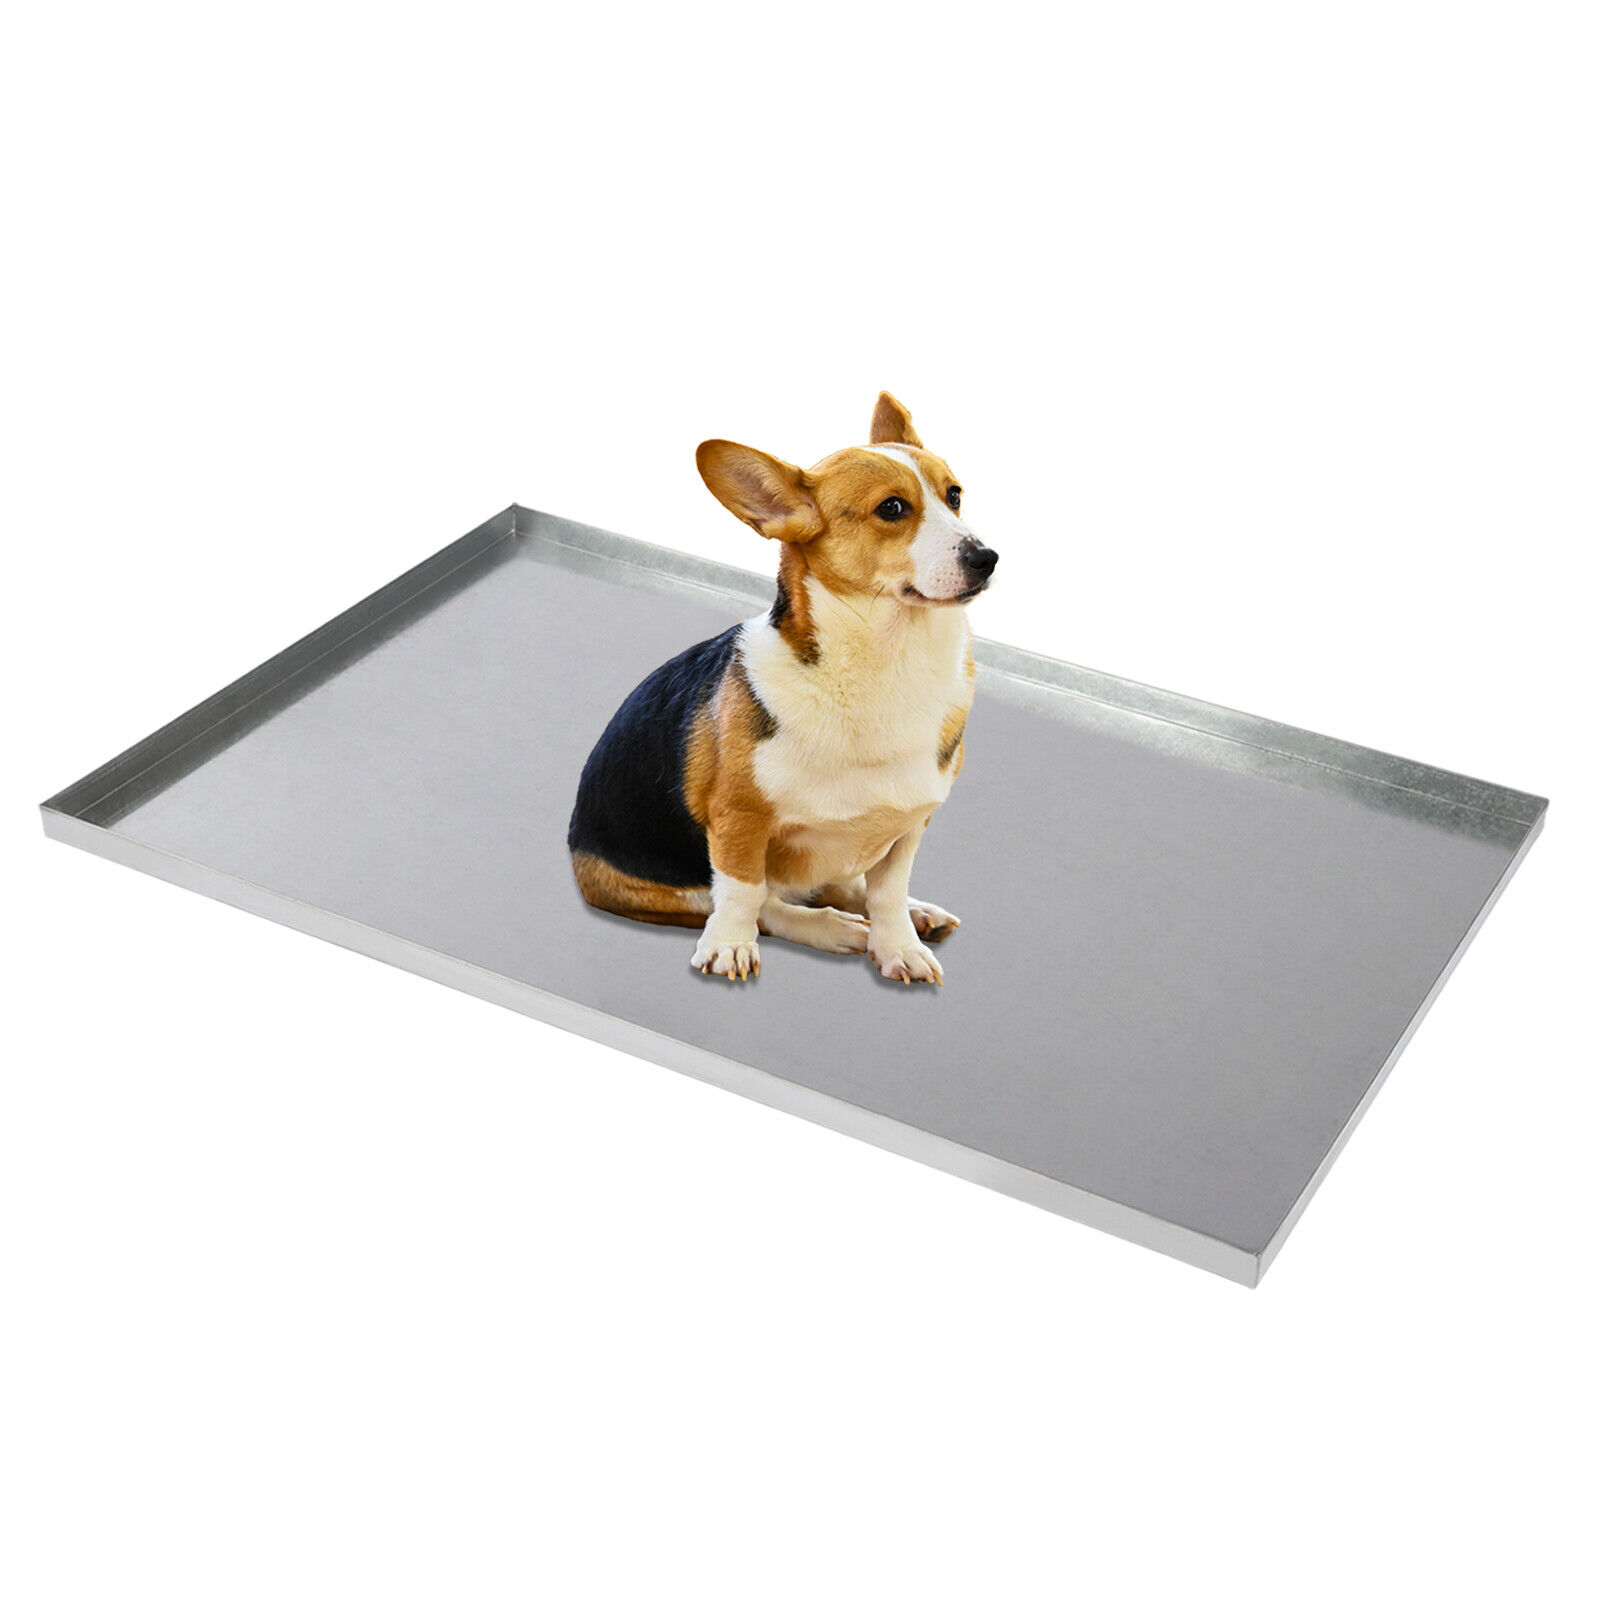 35" For Dog Crate Kennel Replacement Tray Galvanized Steel Pet Cage Pan Silver Unbranded Does Not Apply